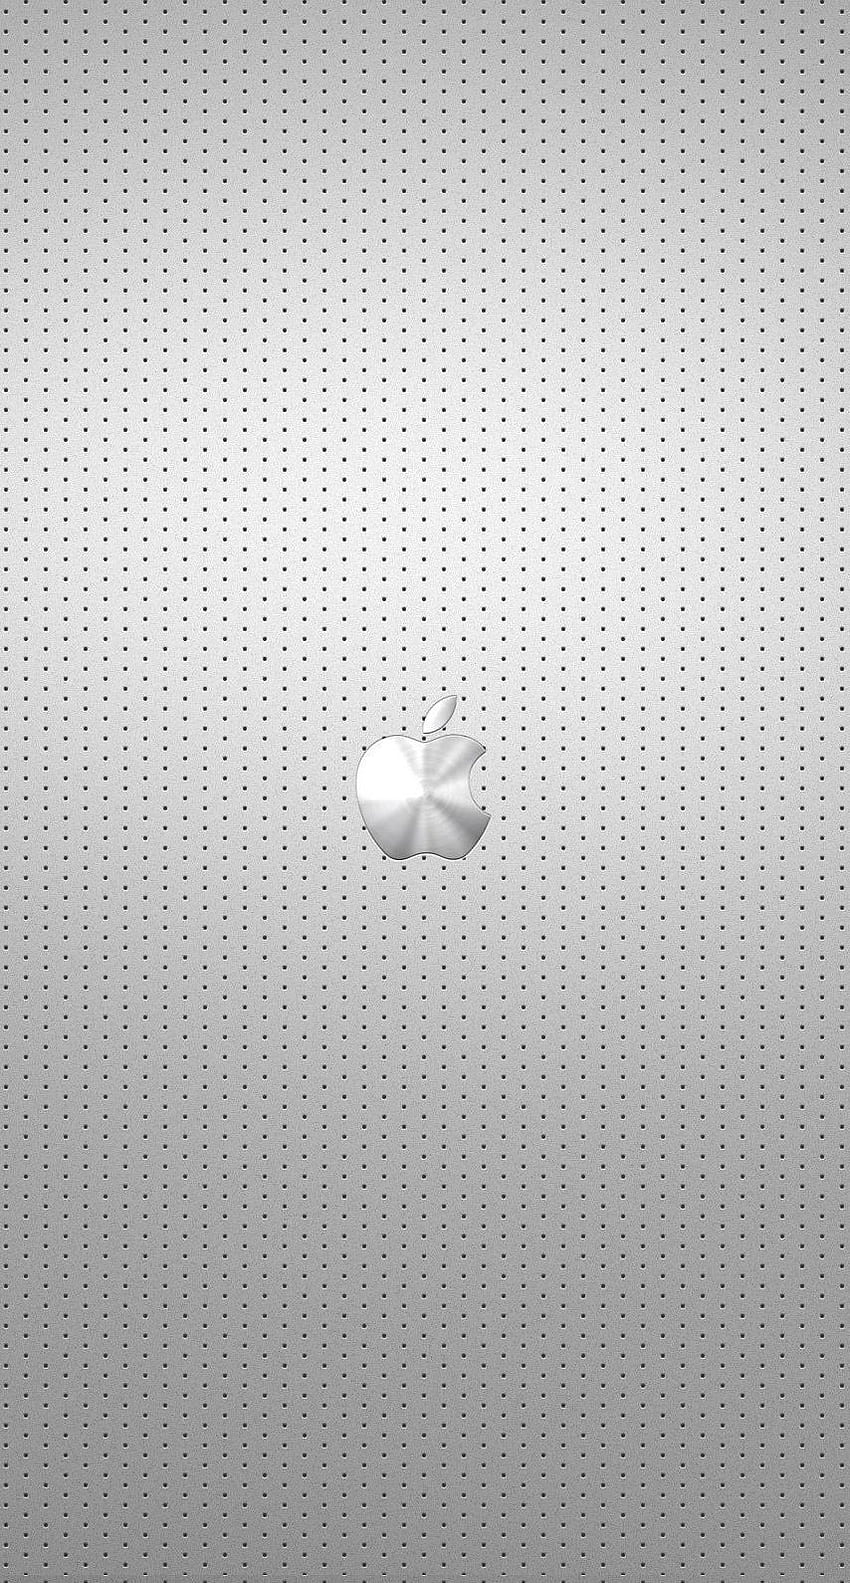 Cool silver Apple logo. .sc iPhone6s in 2020. Apple logo , Cool apple logo, Apple logo HD phone wallpaper